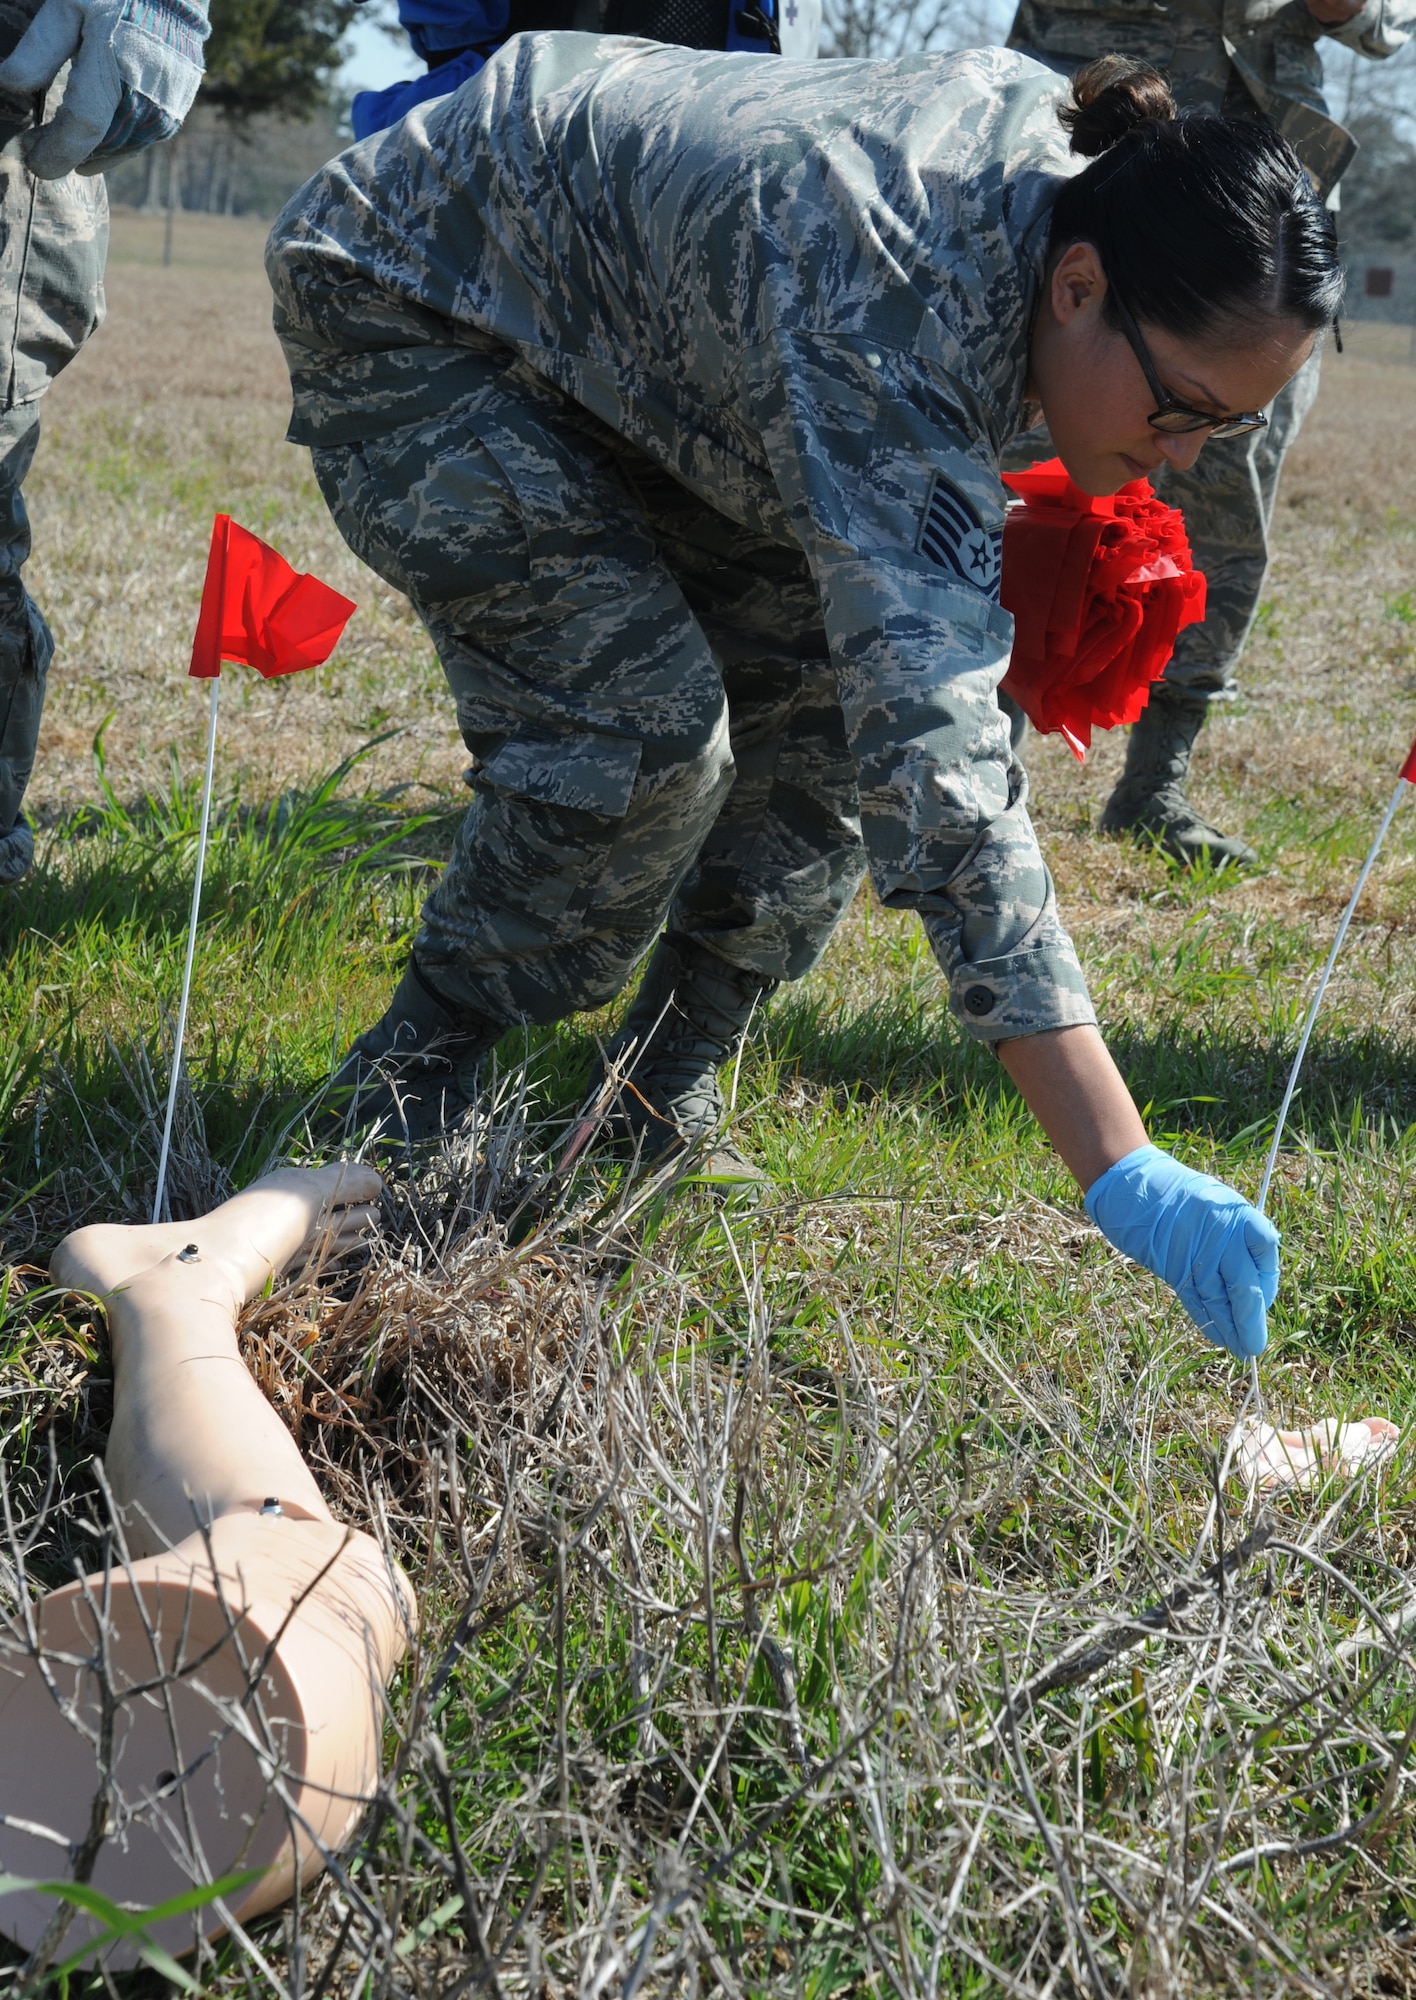 Tech. Sgt. Angelica Santana, 81st Aerospace Medicine Squadron flight medicine non-commissioned officer in charge, flags a “body part” in the search and recovery efforts during a major accident response exercise Feb. 12, 2015, on the flight line, Keesler Air Force Base, Miss.  The MARE simulated a C-130J Hercules aircraft crash on base. The exercise was held to test the readiness of Keesler personnel during a major accident.  (U.S. Air Force photo by Kemberly Groue)